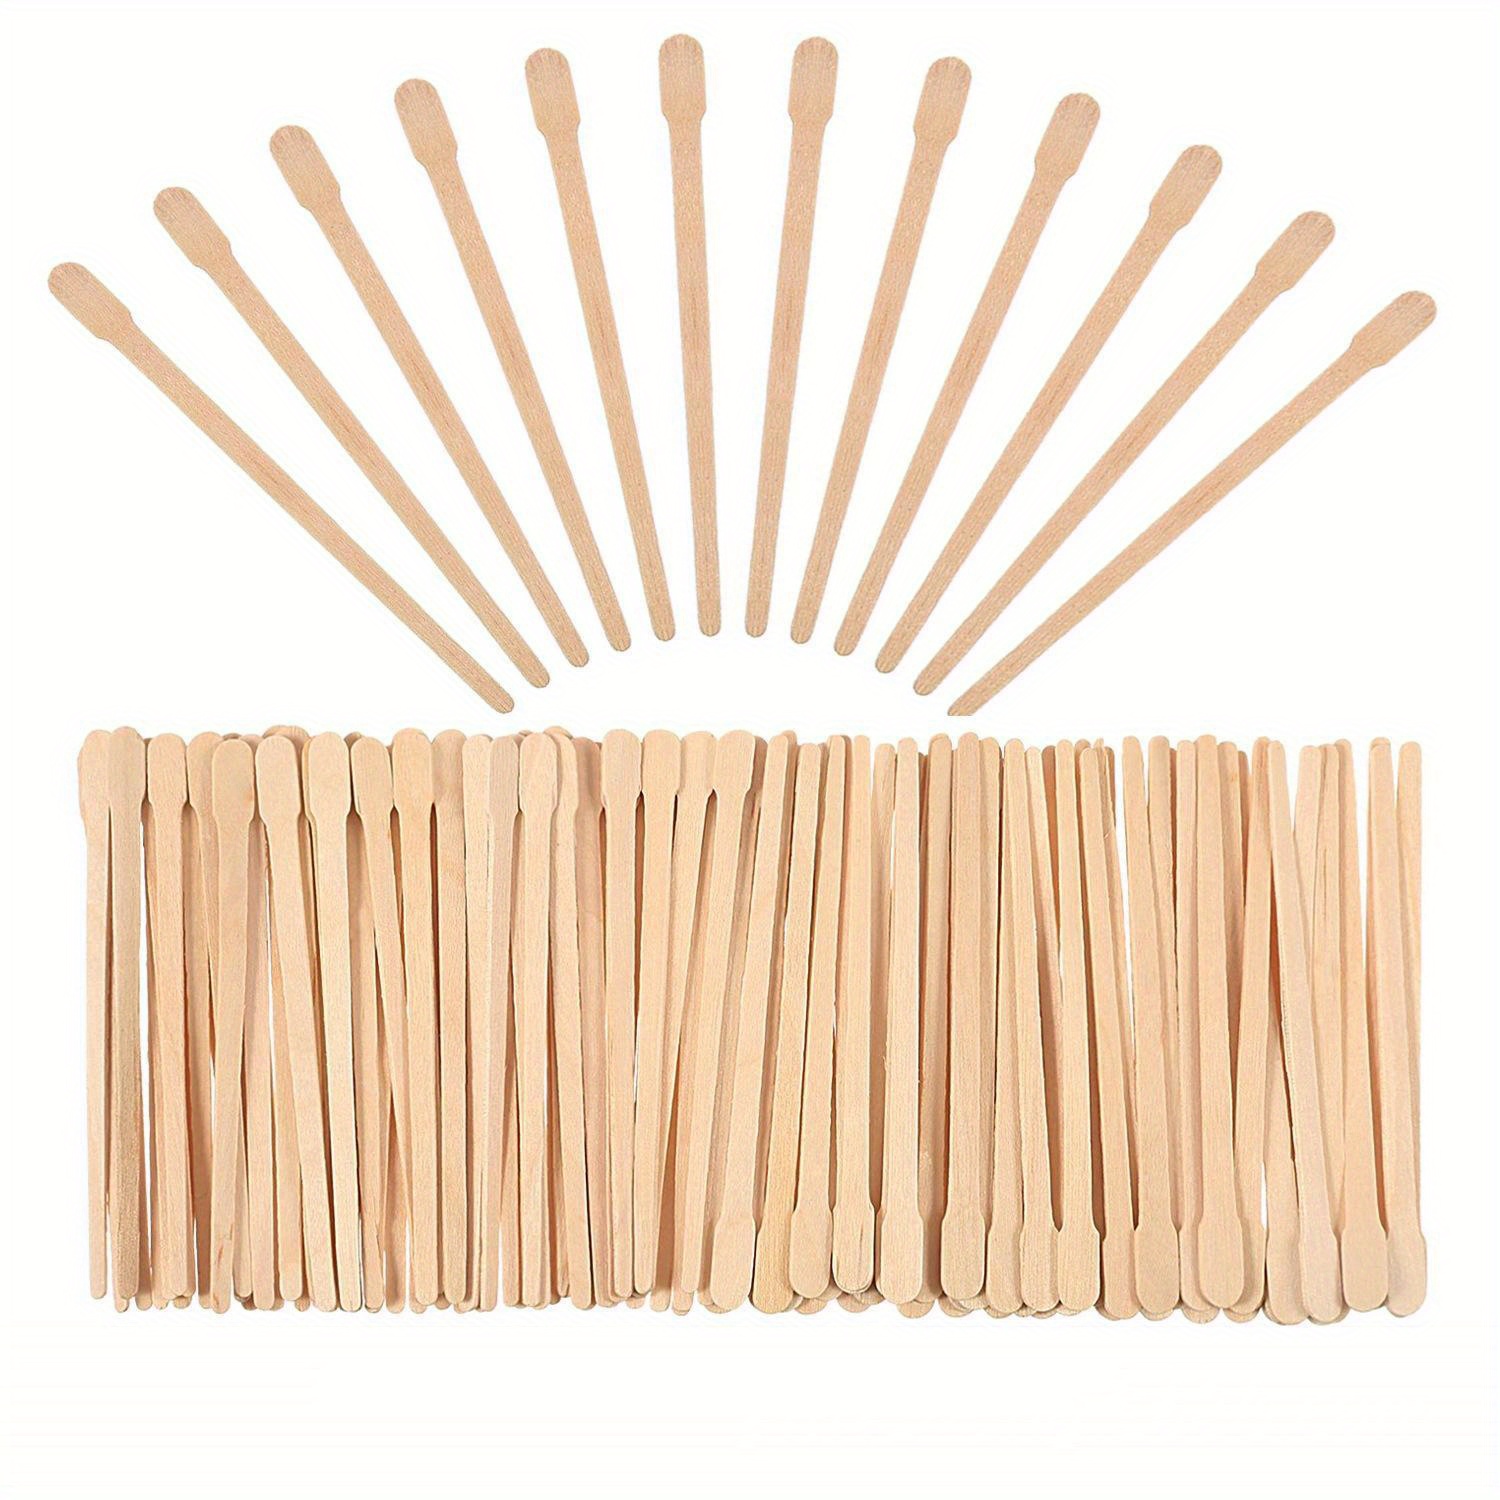  1200Pcs Wooden Wax Sticks - HOOMBOOM Wax Spatulas - Eyebrow,  Lip, Nose Small Waxing Applicator Sticks for Hair Removal and Smooth Skin -  Spa and Home Usage : Beauty & Personal Care